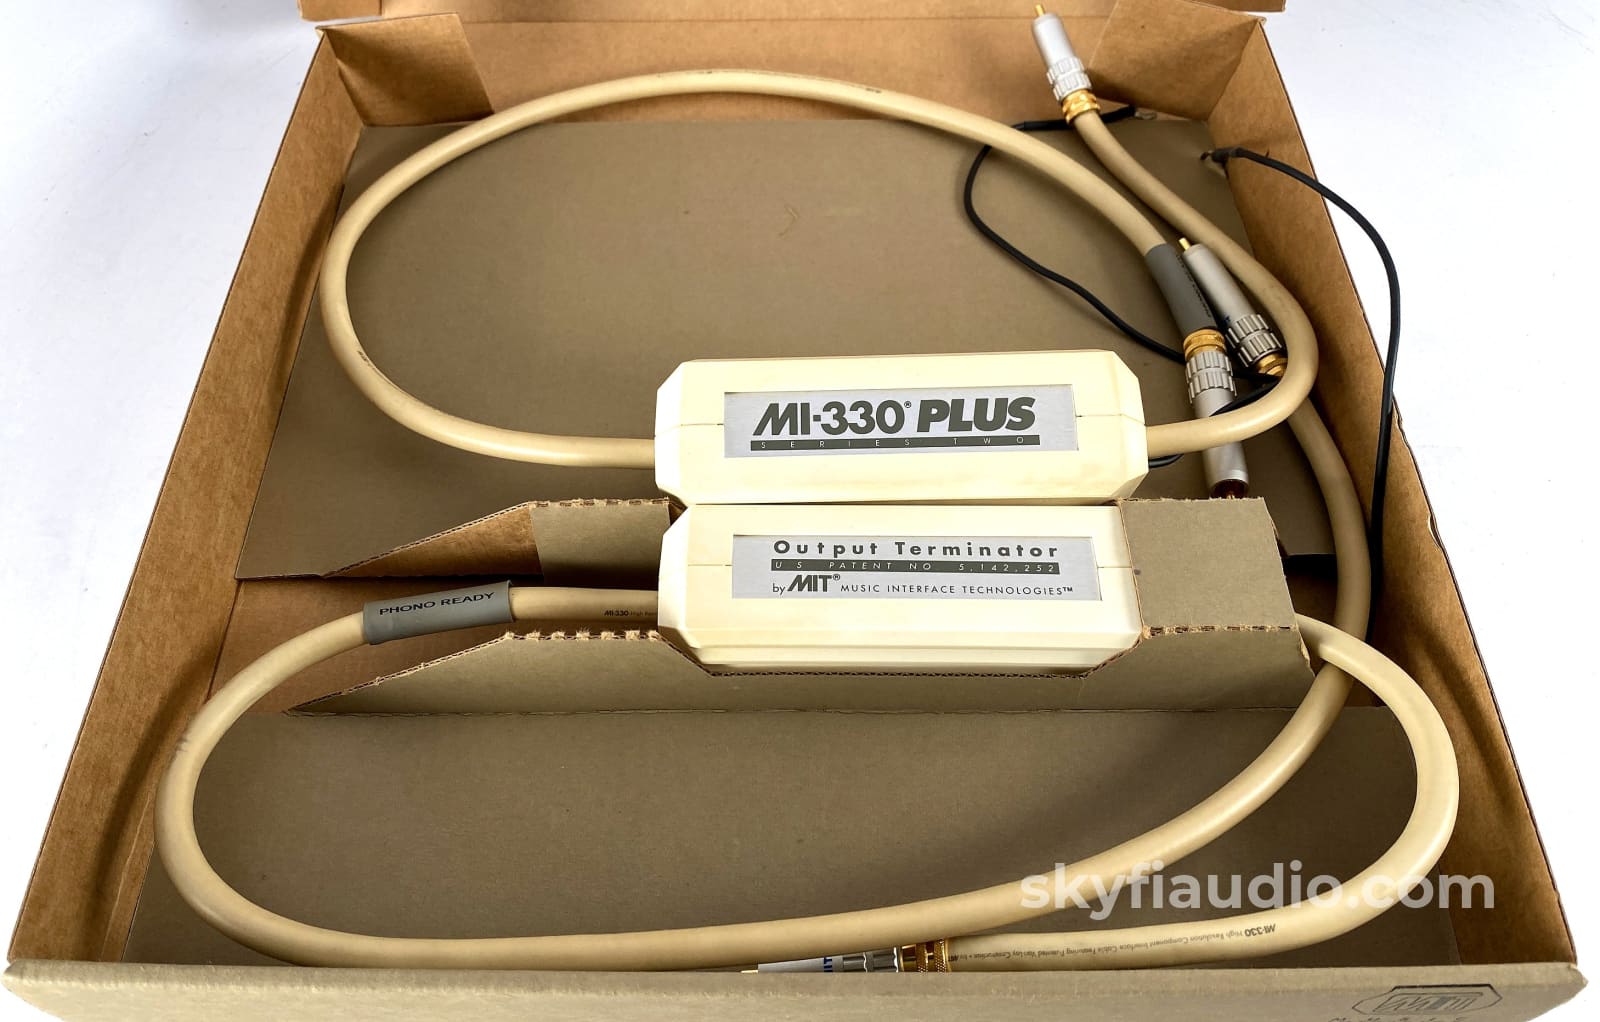 Mit (Music Interface Technology) Mi-330 Plus Series Two Phono Cable Rare! 1M Cables